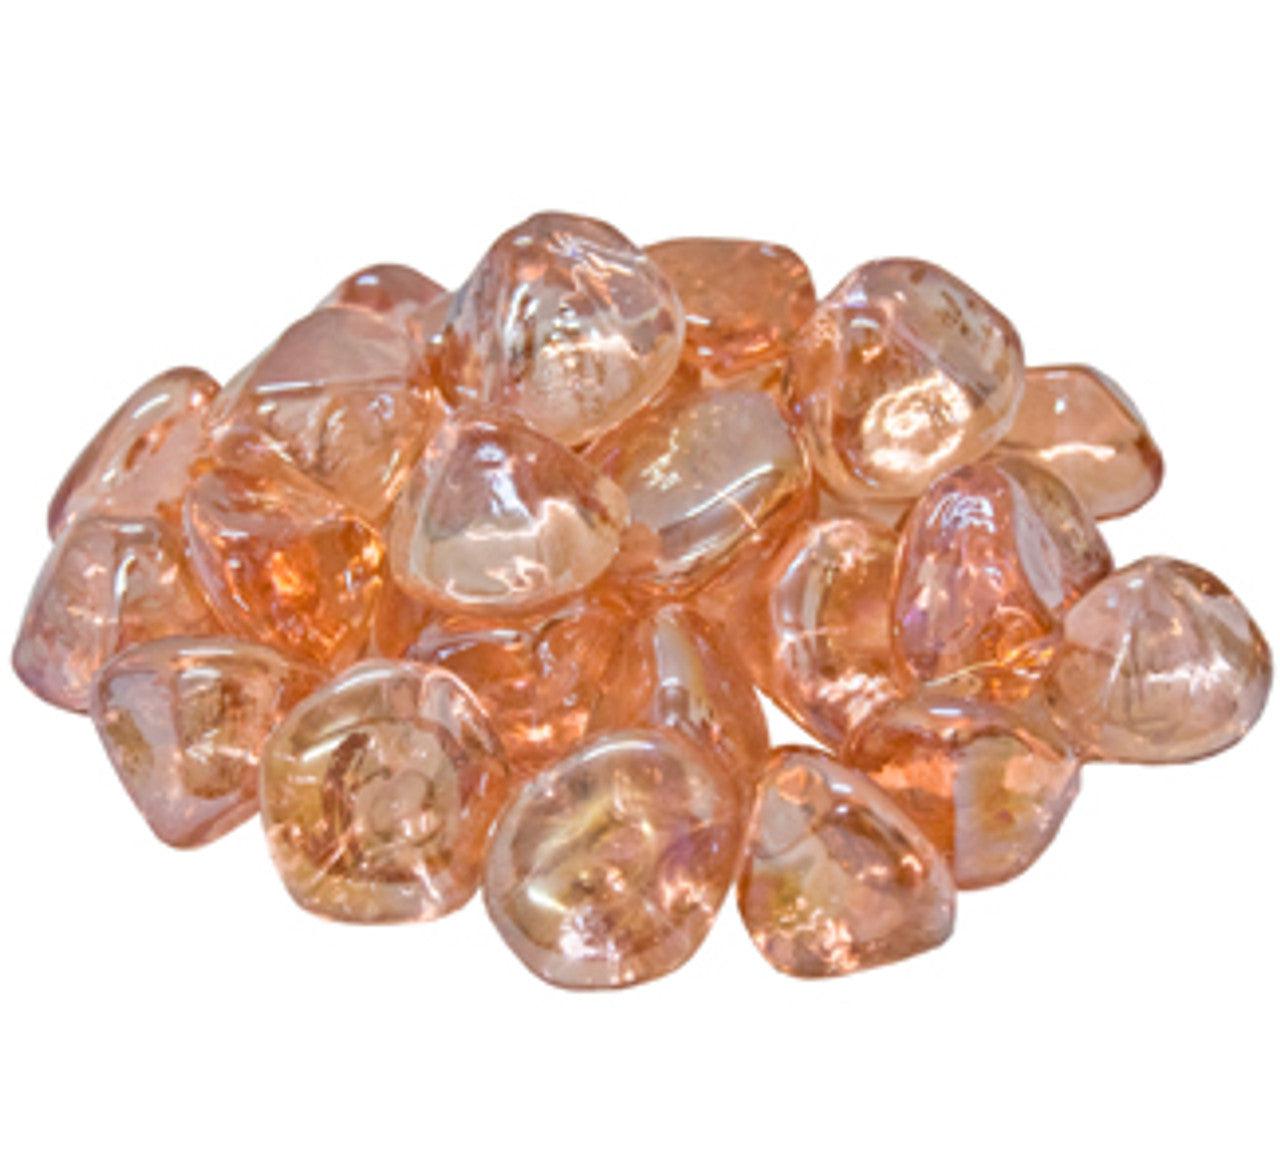 30 lb. Package of Diamond Nuggets Glass Media